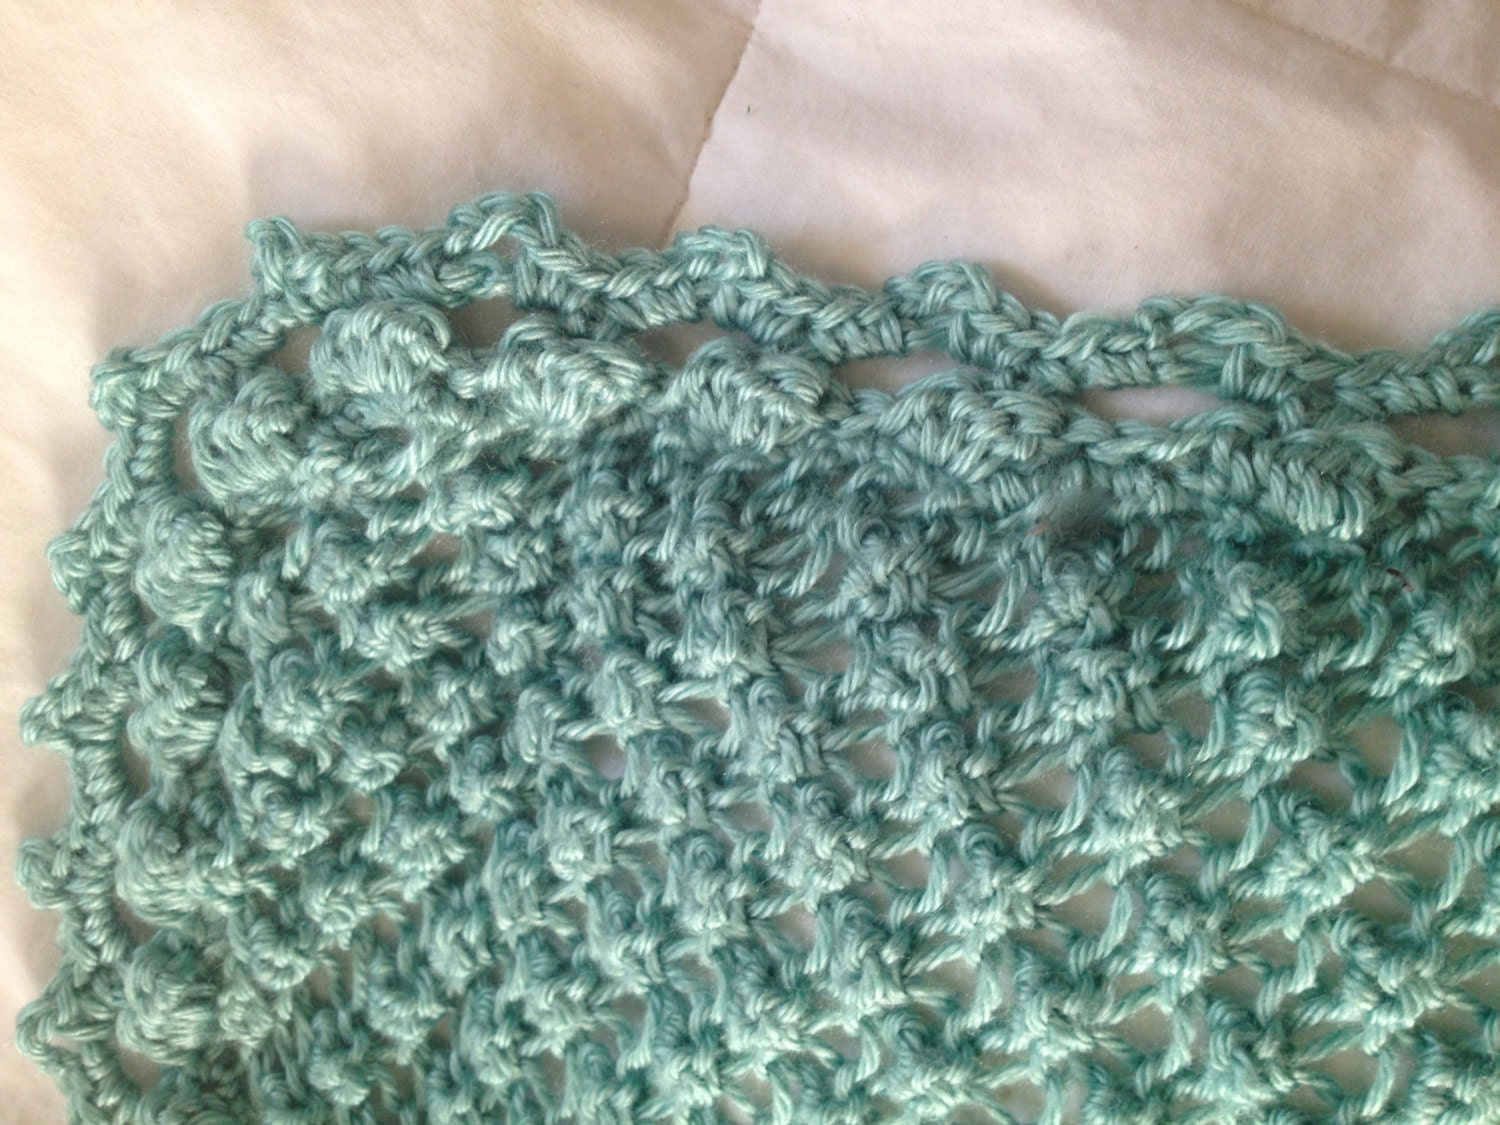 Hand Knit Baby Blanket in Popcorn stitch pattern with